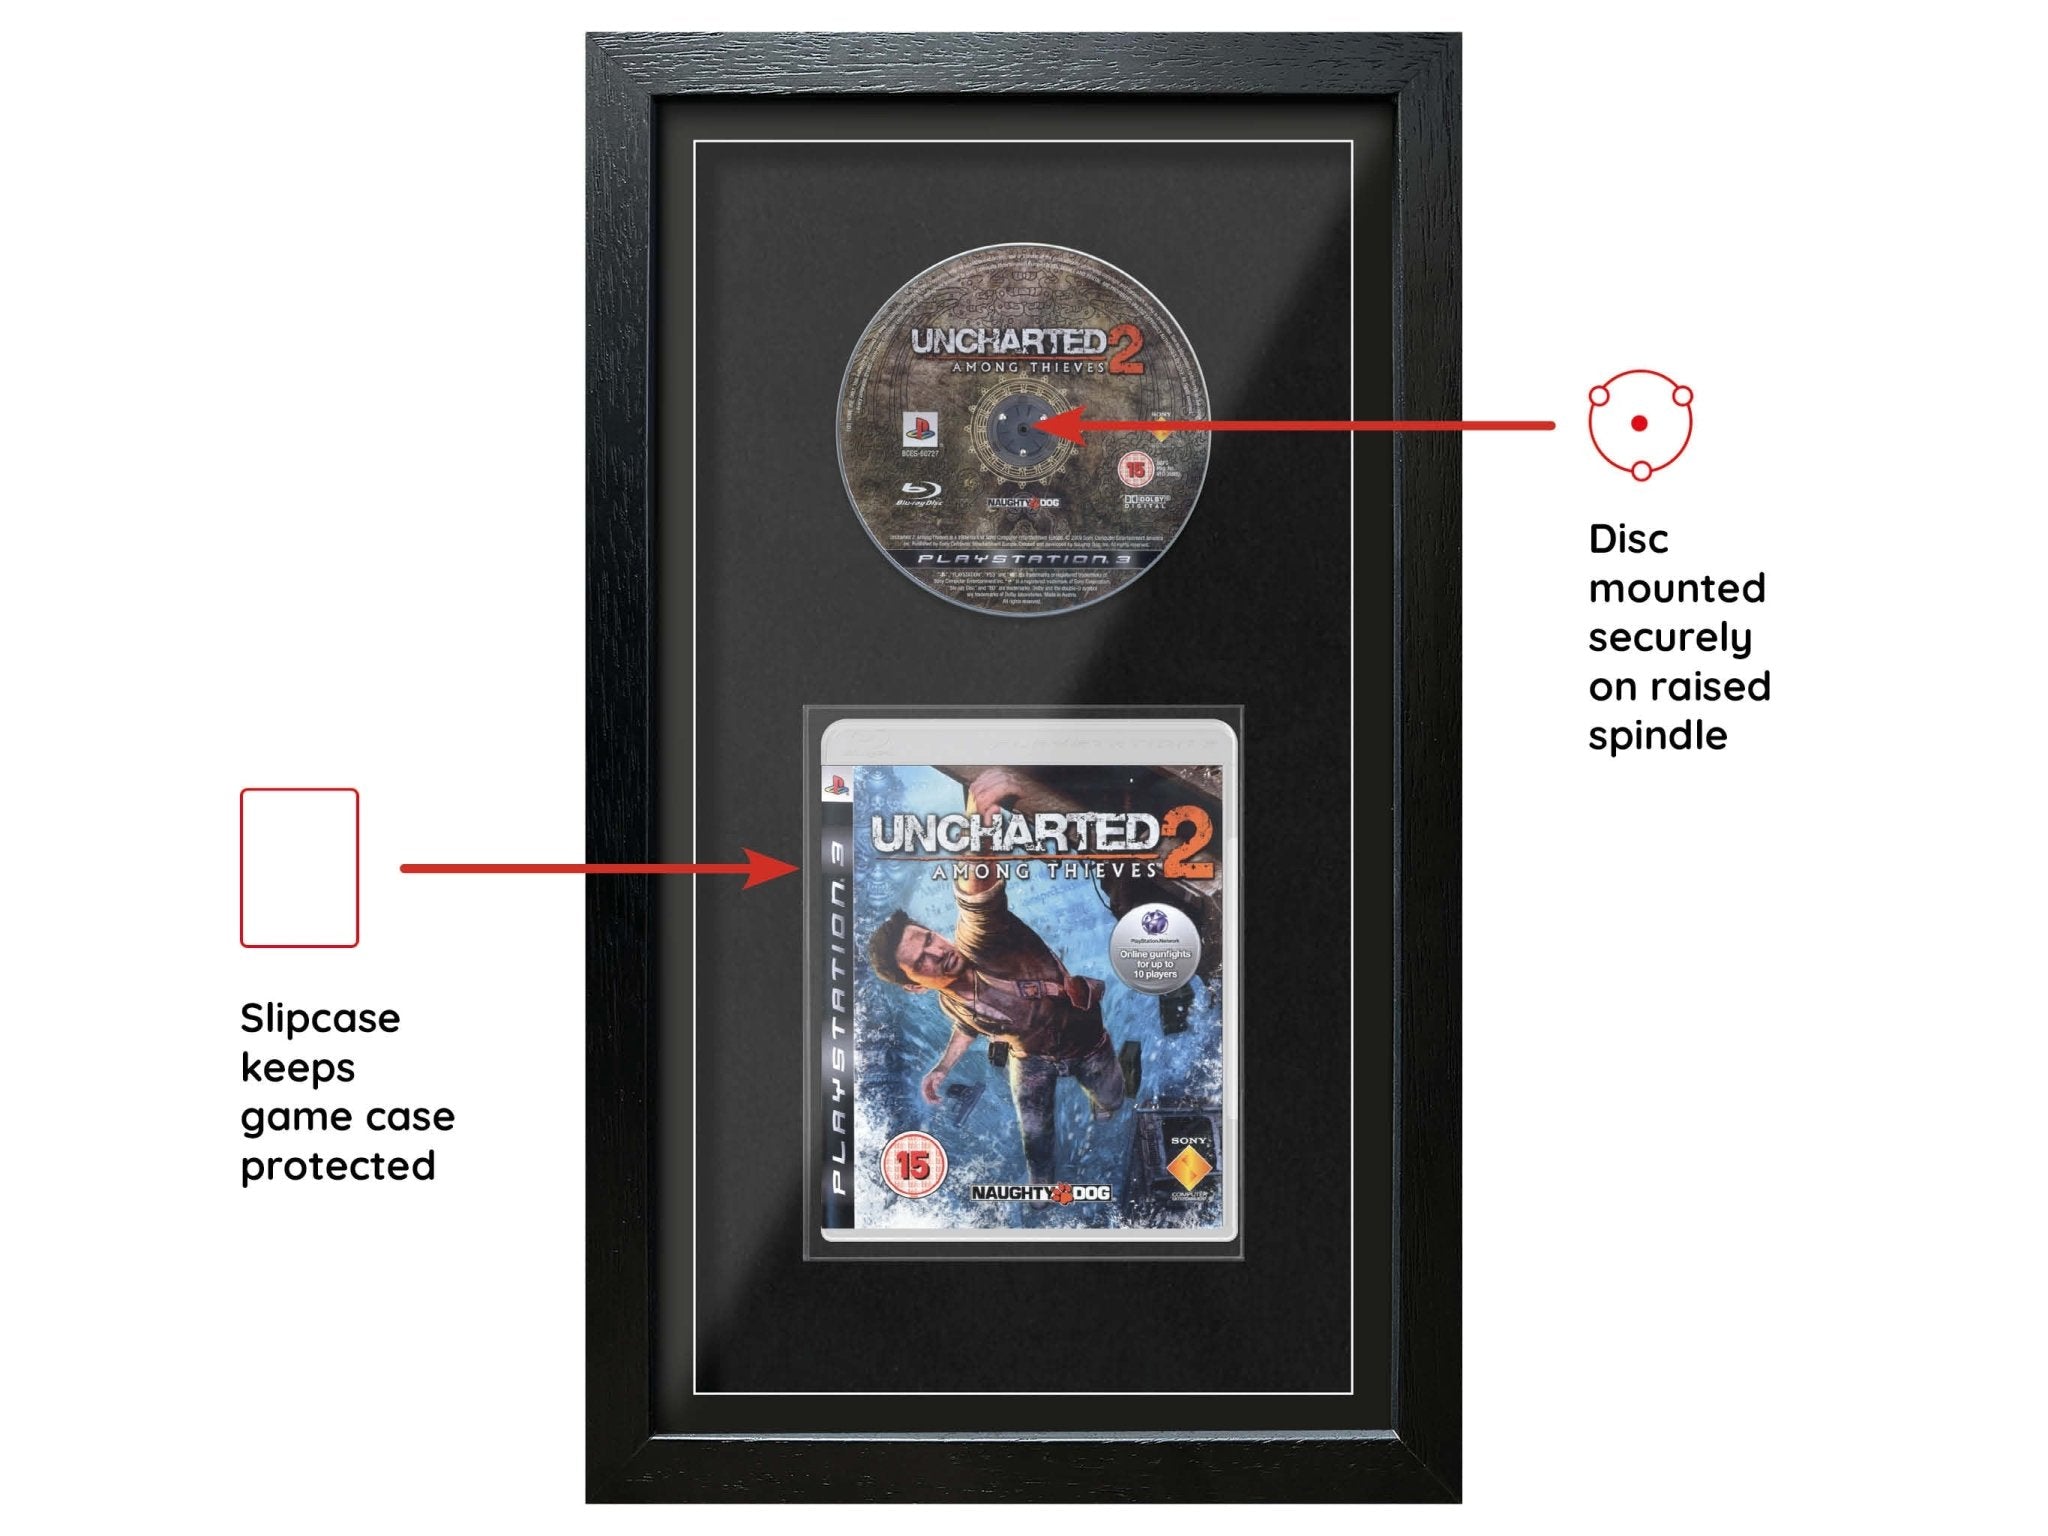 Uncharted 2: Among Thieves (Exhibition Range) Framed Game - Frame-A-Game